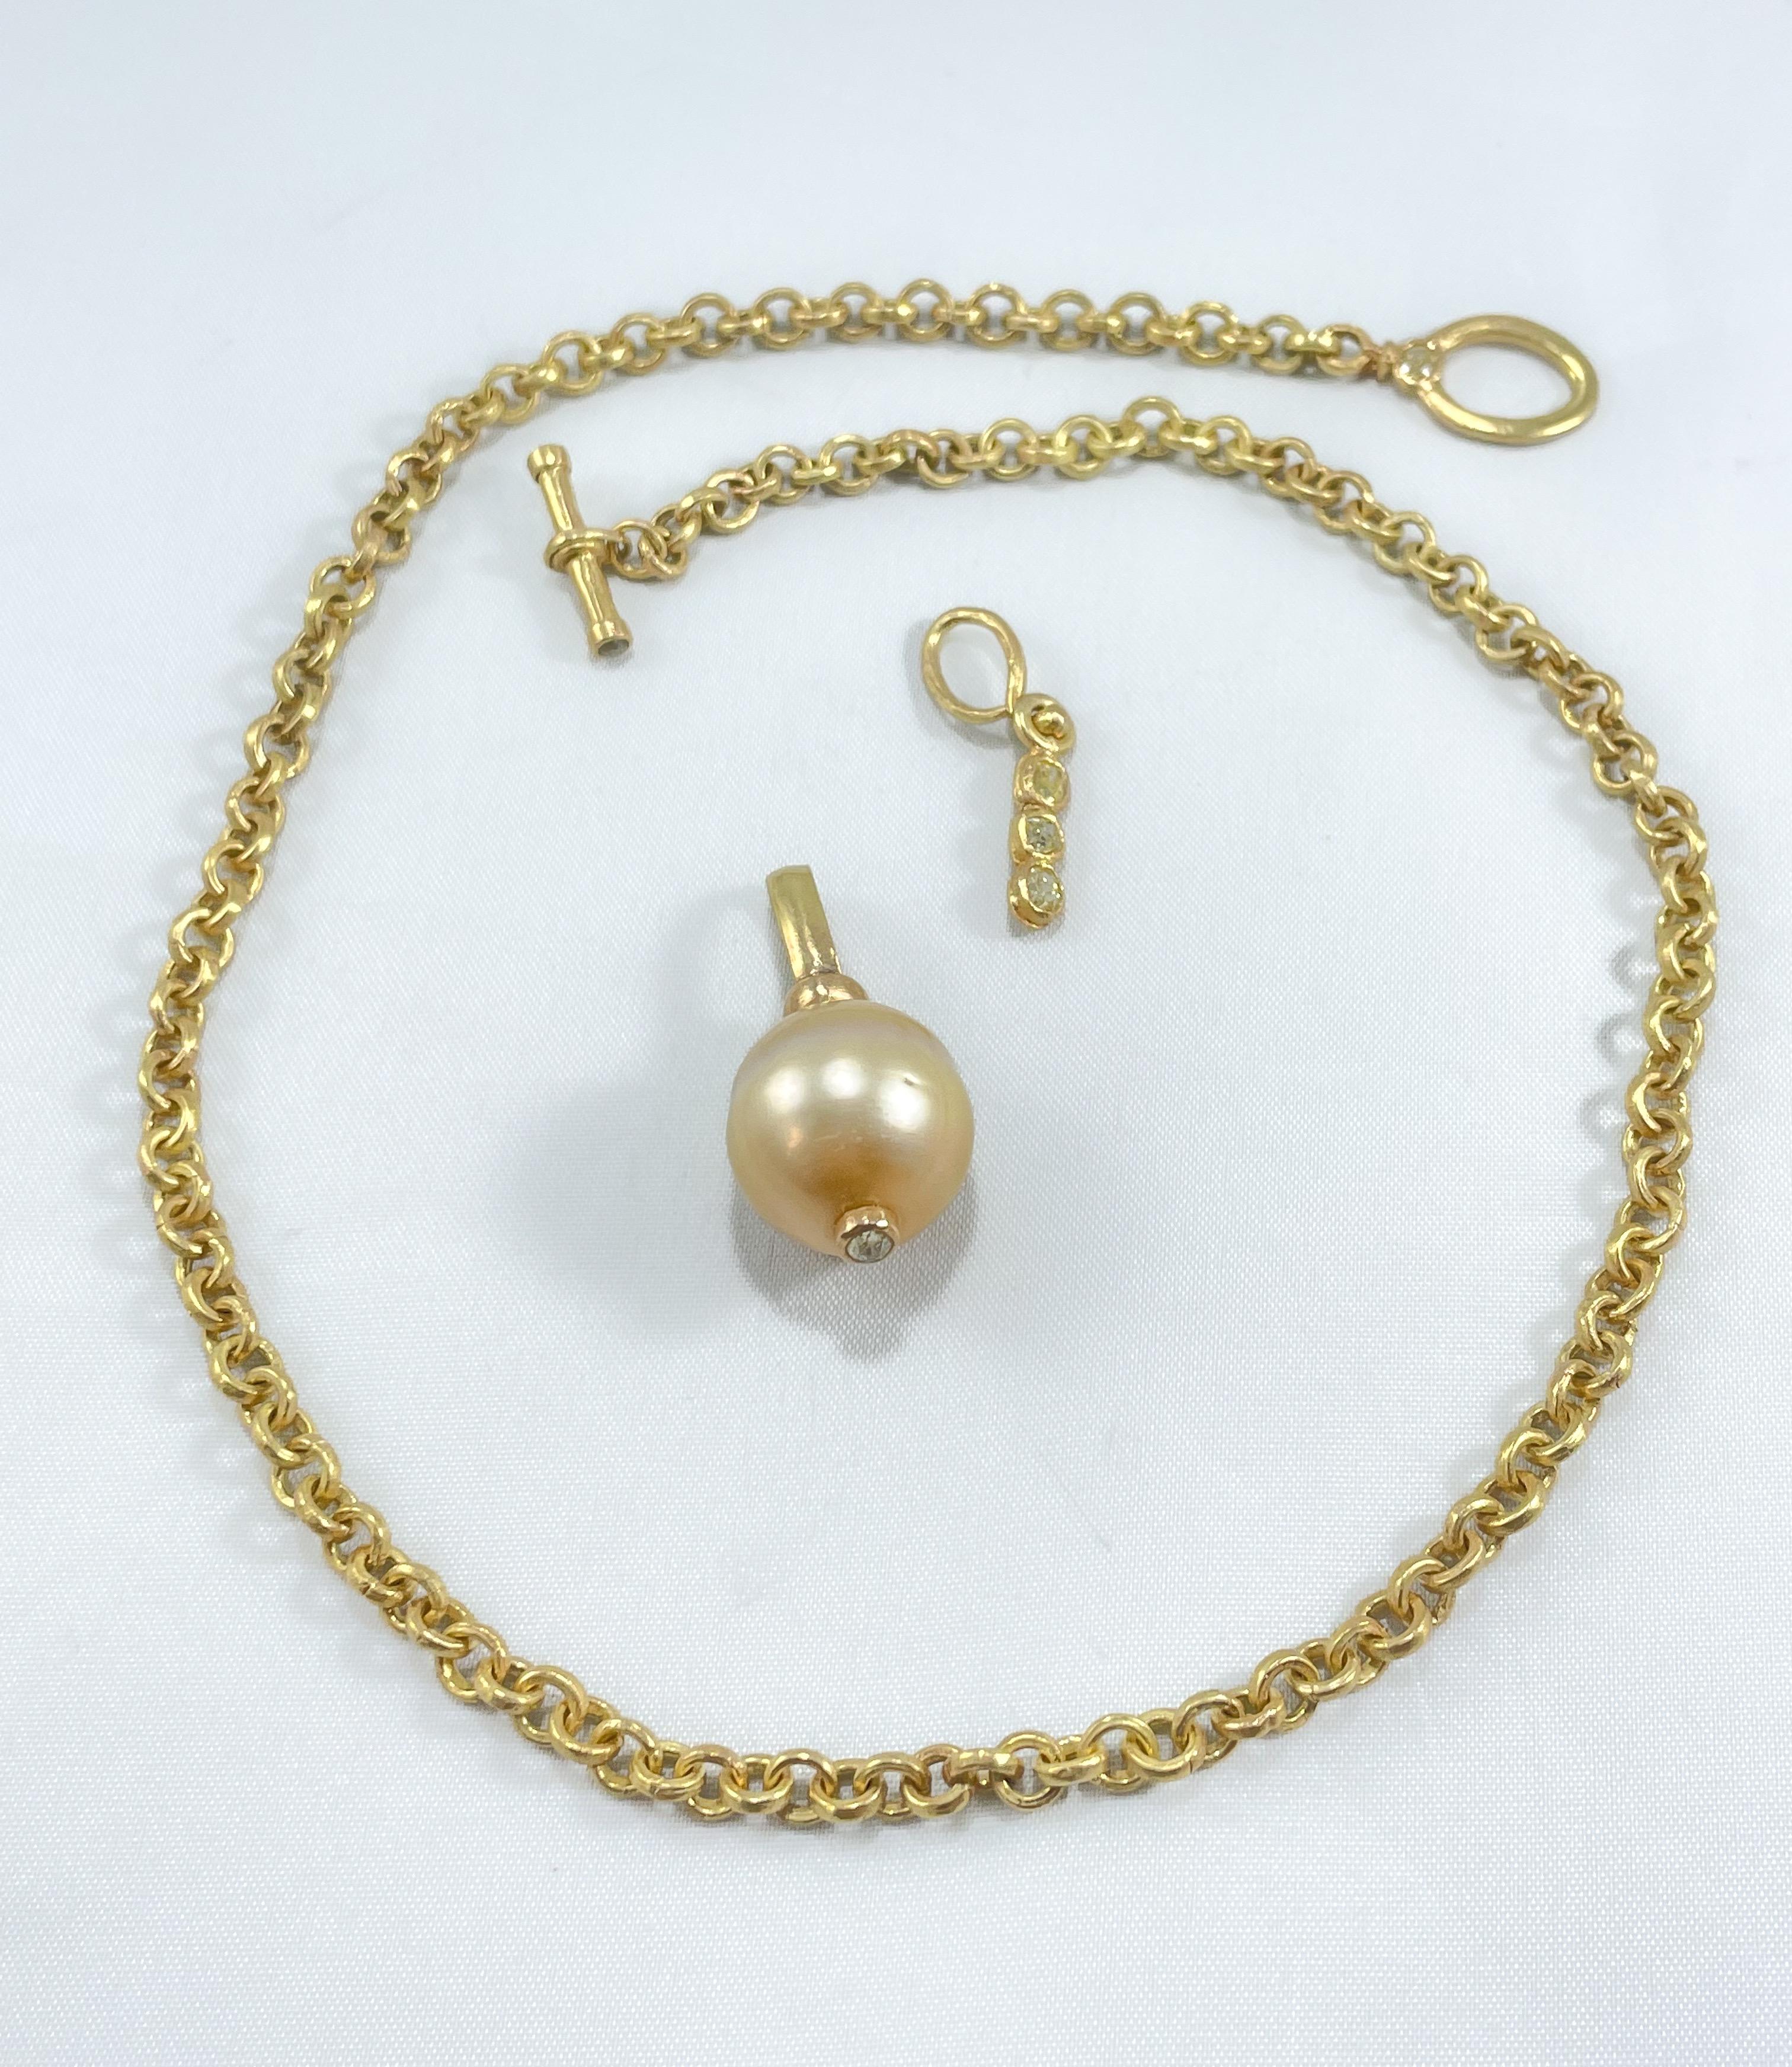 A large cream 17mm cultured pearl on a hand-crafted drop link necklace with a diamond enhancer. All are in recycled 18K gold. The necklace is made up of round uniformly shaped links. 18